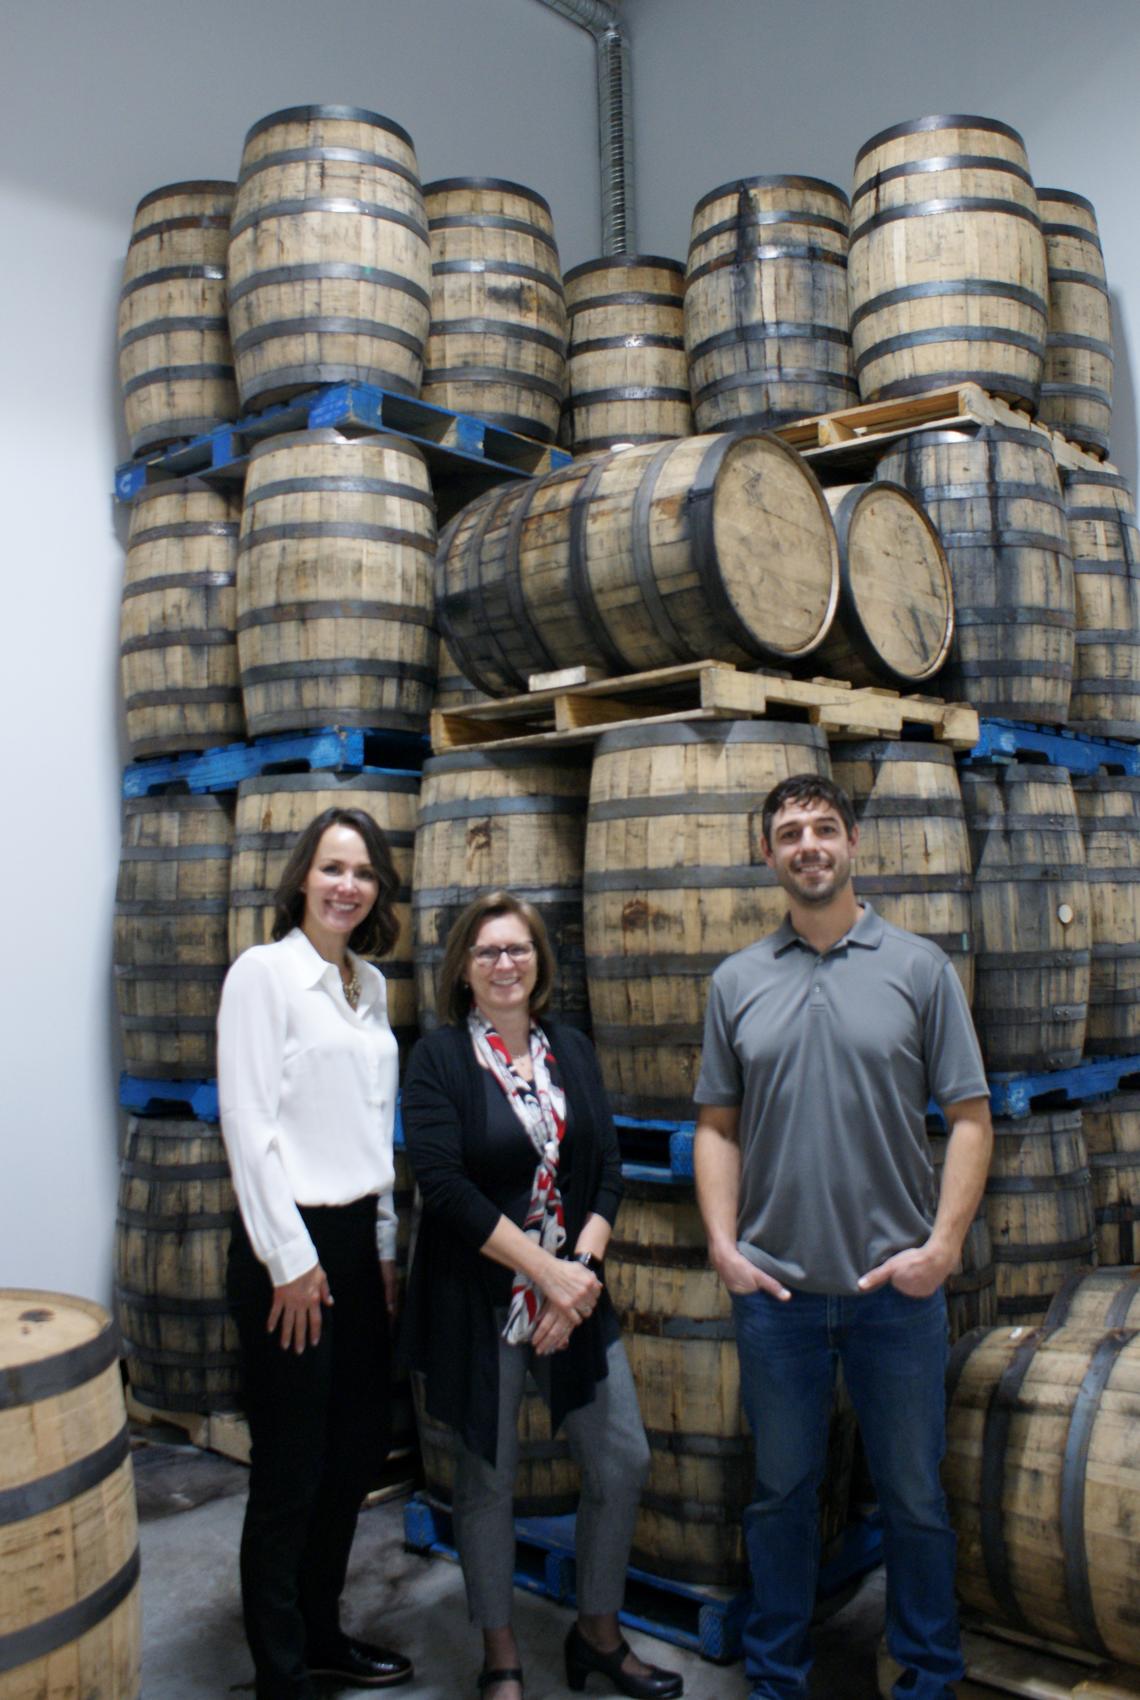 Leitha Cosentino, Director of Development, and Dr. Lesley Rigg, dean of the Faculty of Science, and Tomas Romero, pictured in front of casks at Romero Distilling.